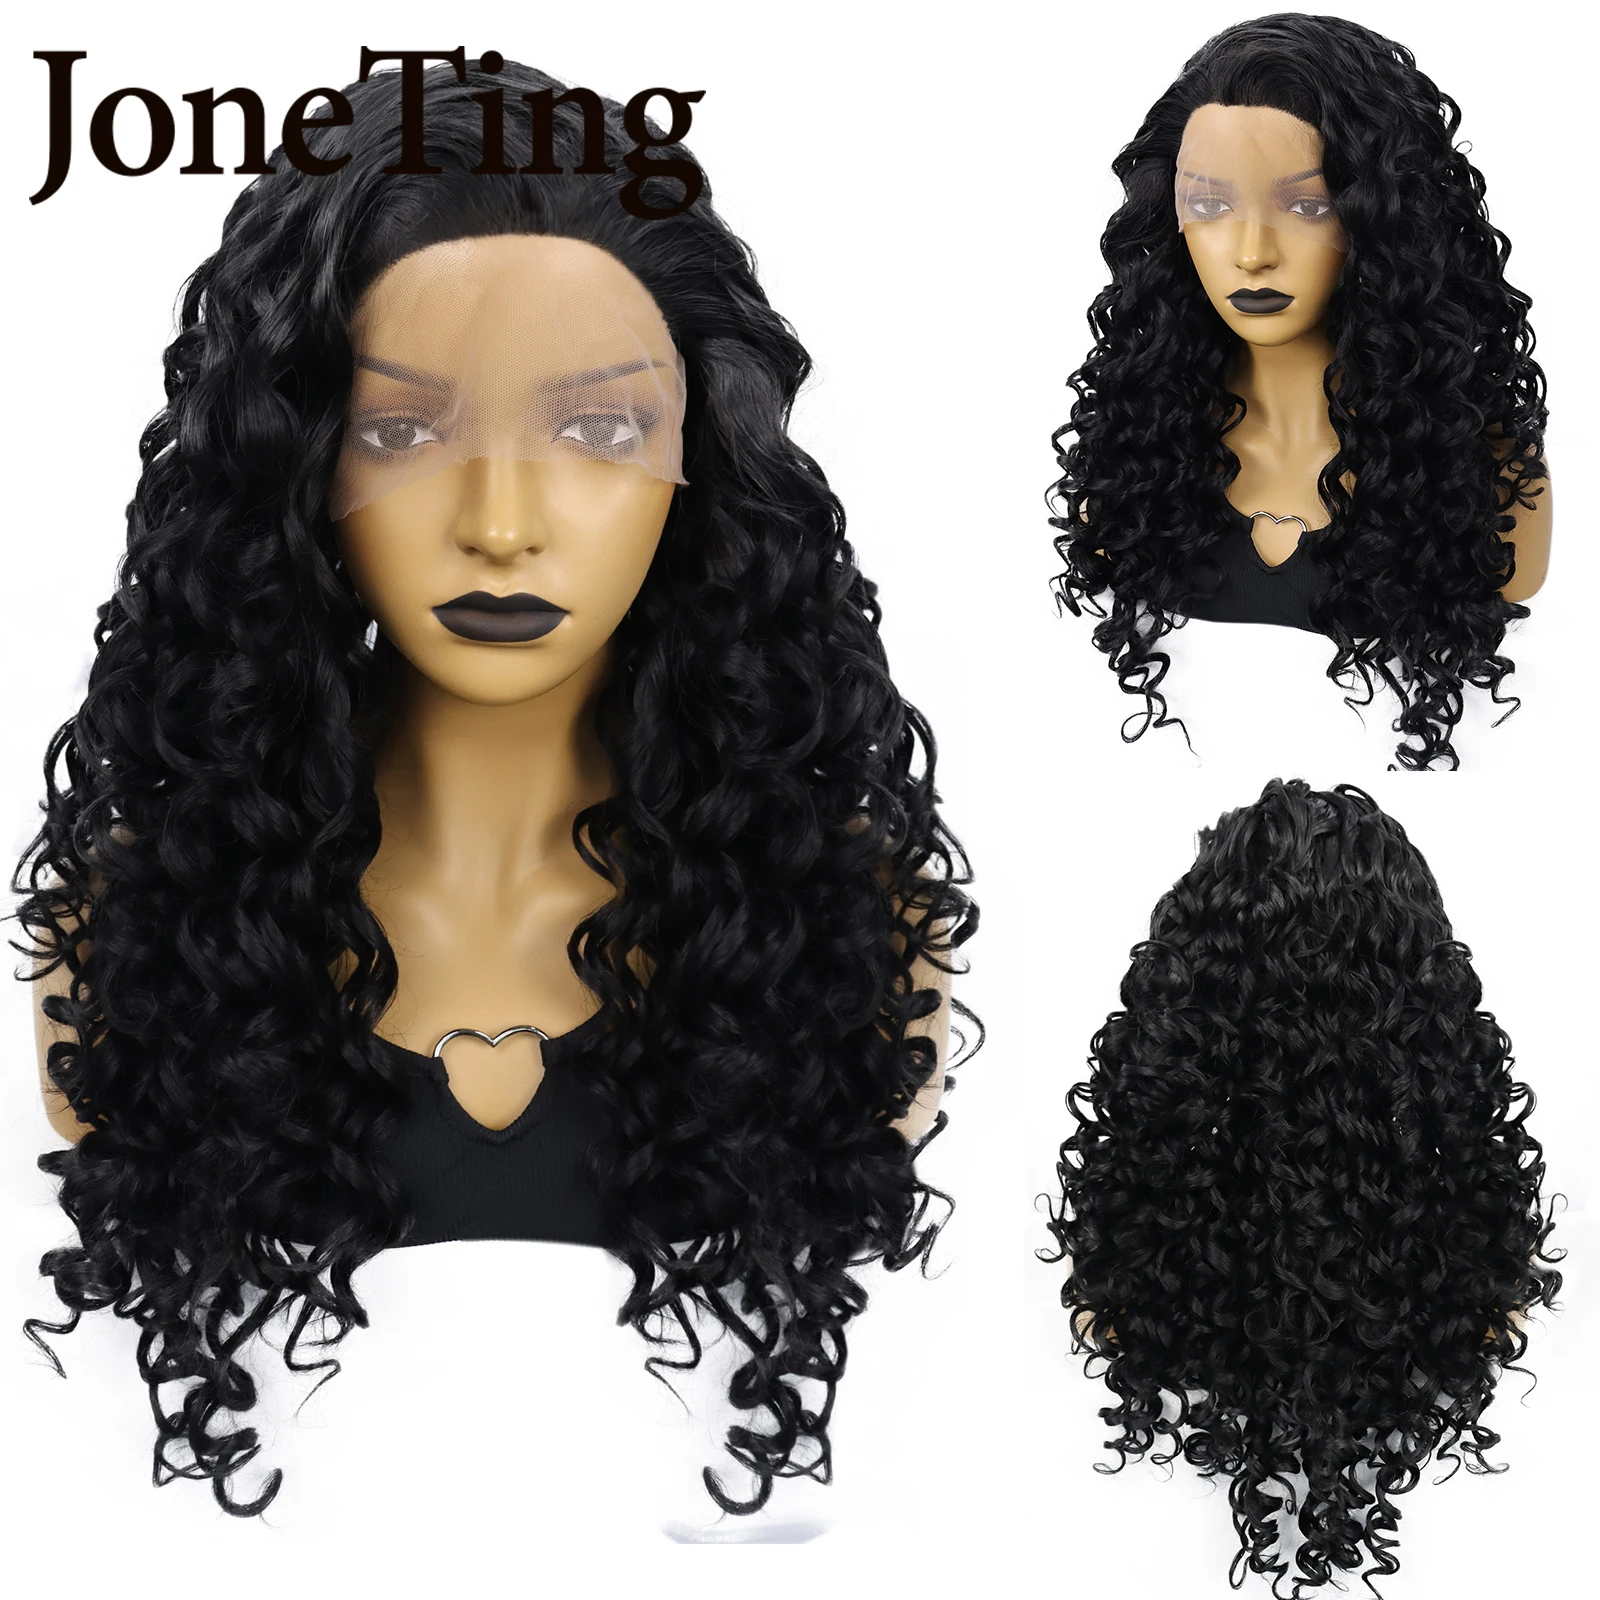 JONETING Synthetic 26inch Black Afro Kinky Curly Lace Front Wig Lolita Wavy Heat Resistant Fiber Wavy Lace Front Wig Free Cap